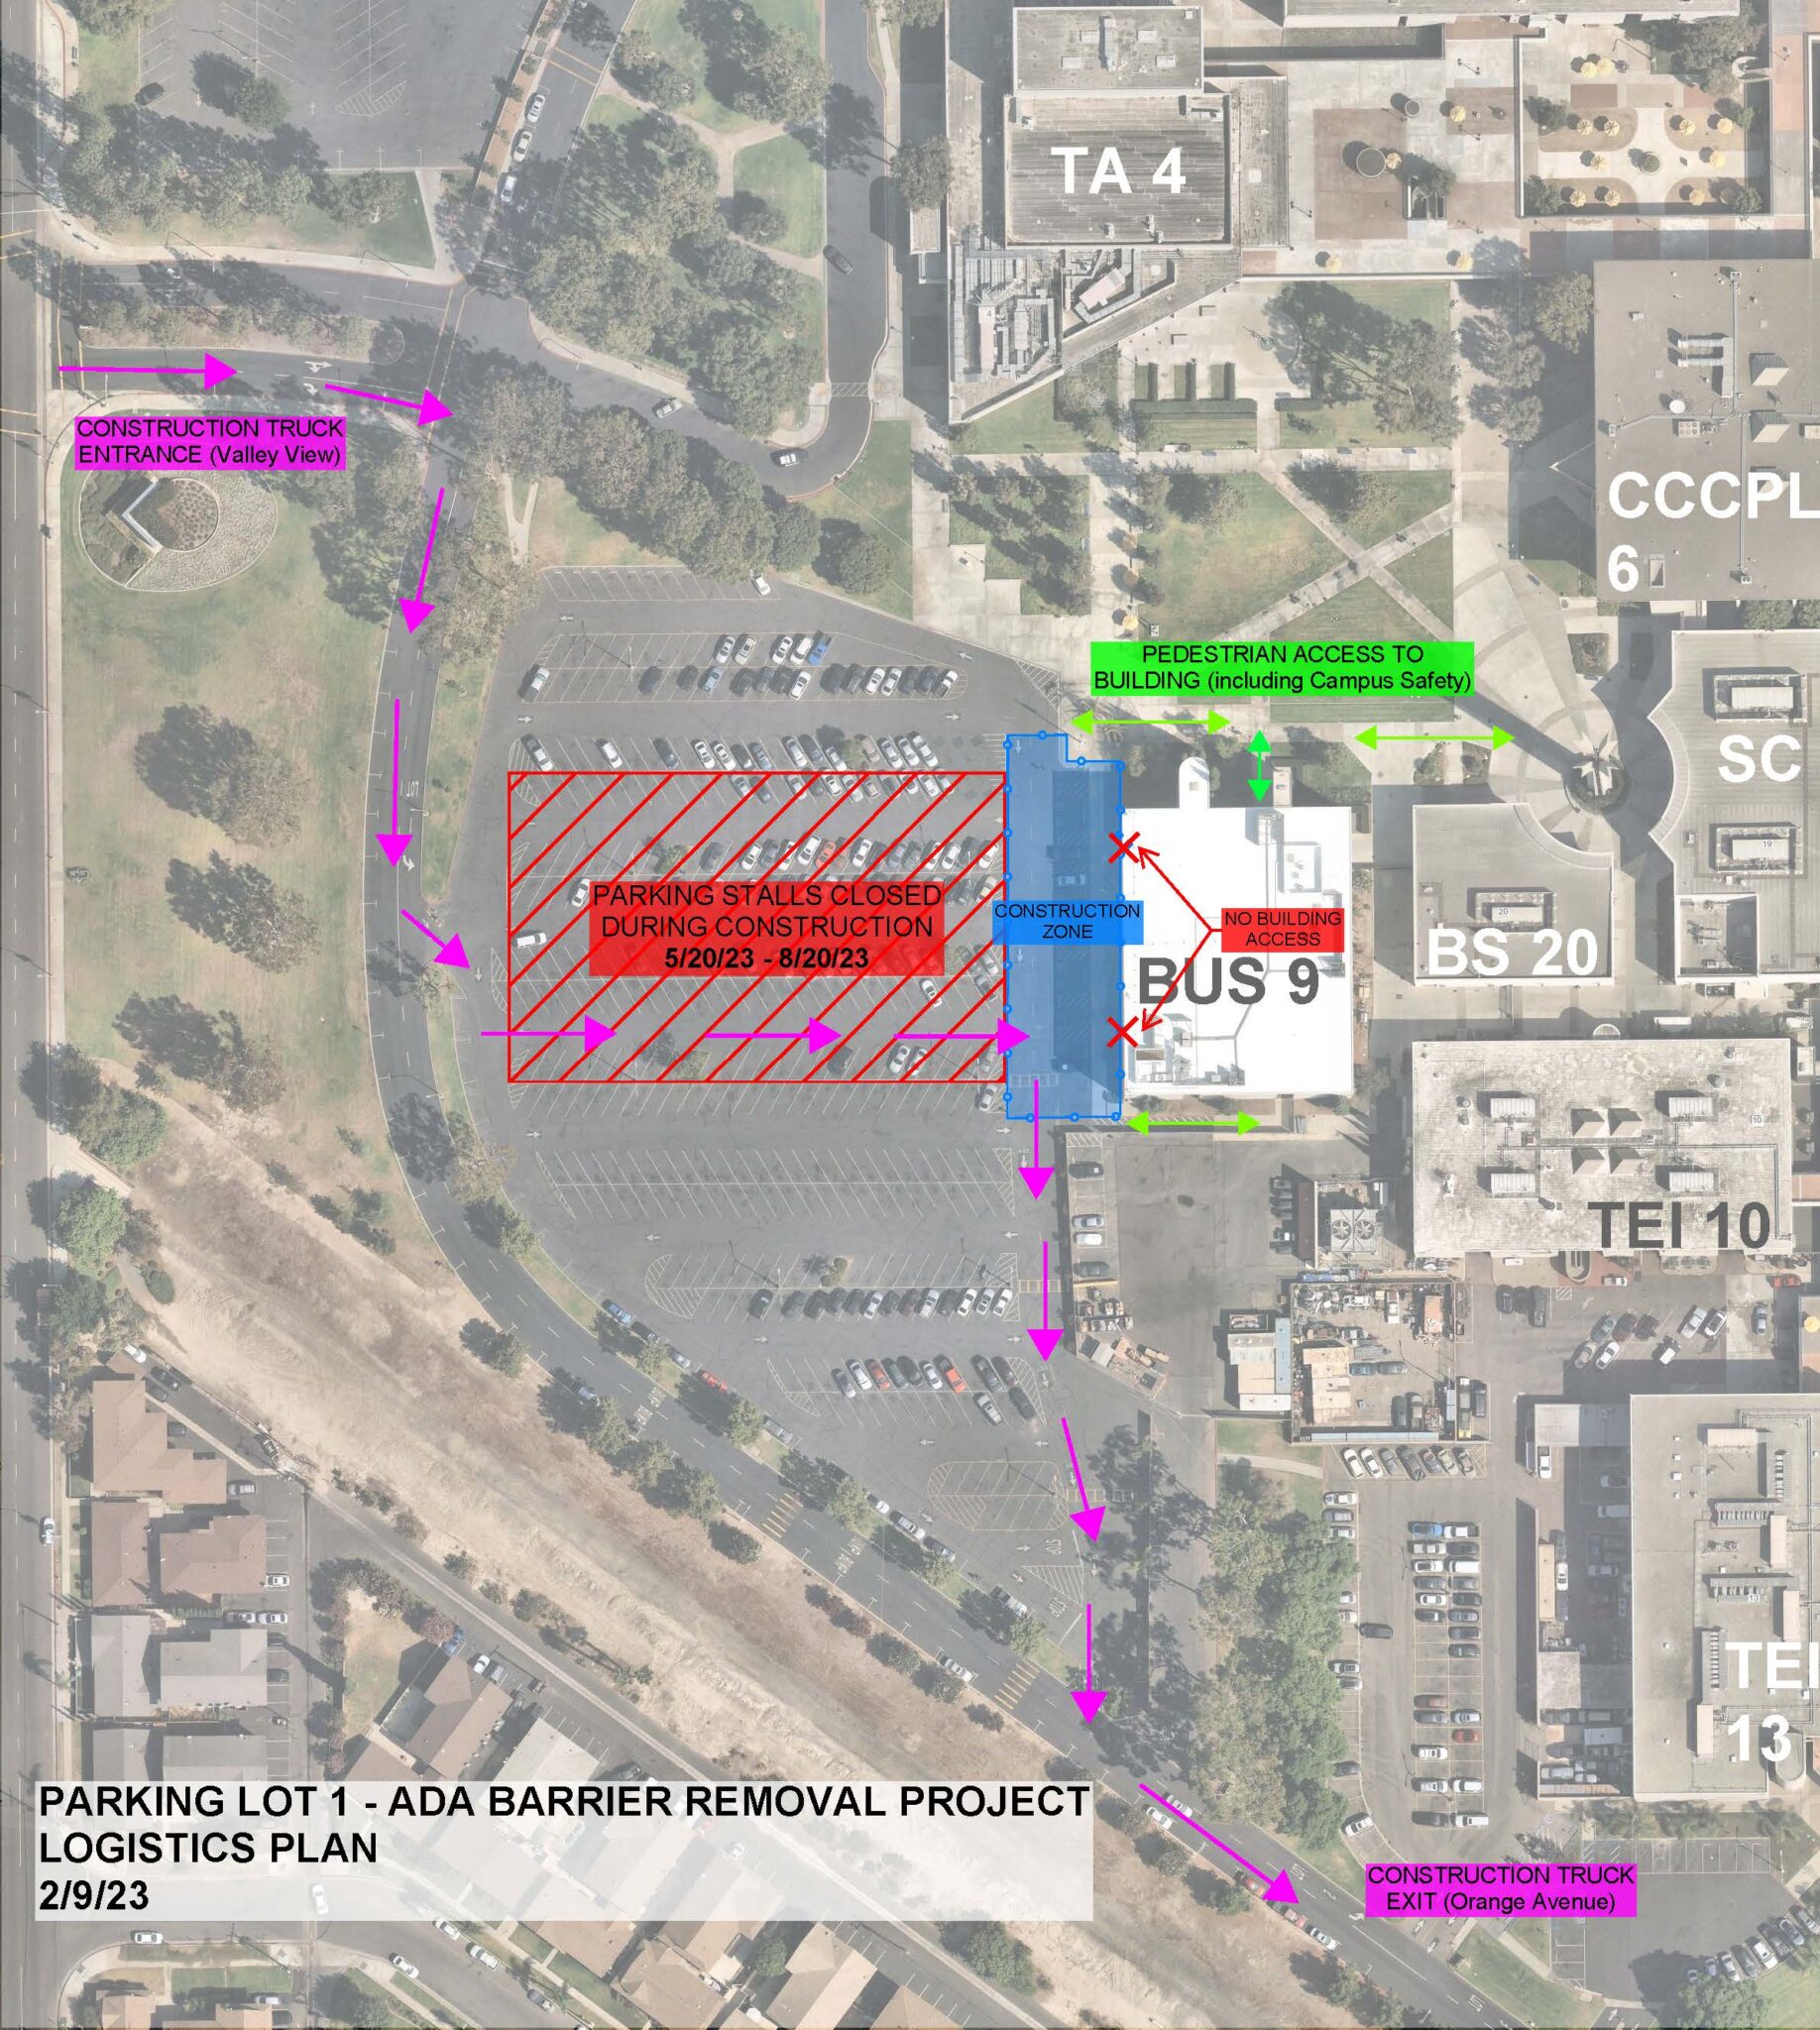 Map of Lot 1 with construction